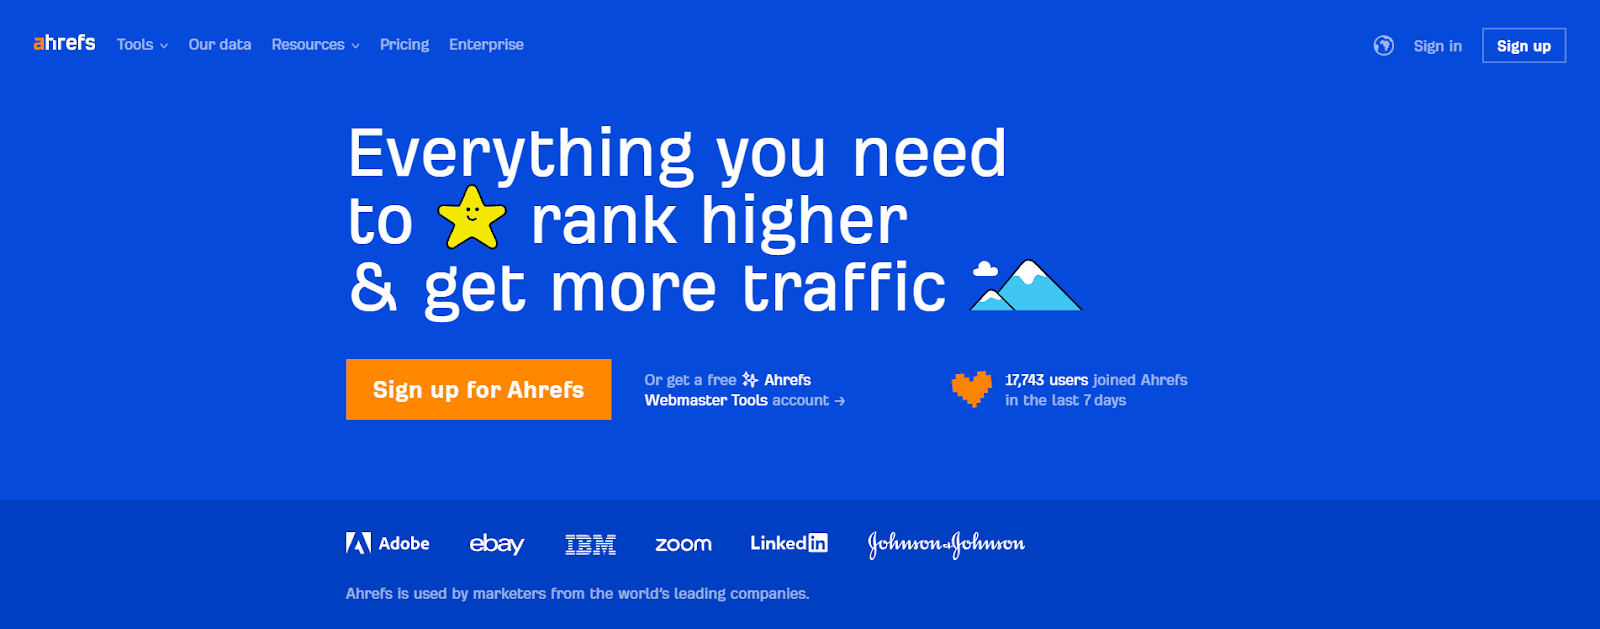 link building with ahrefs